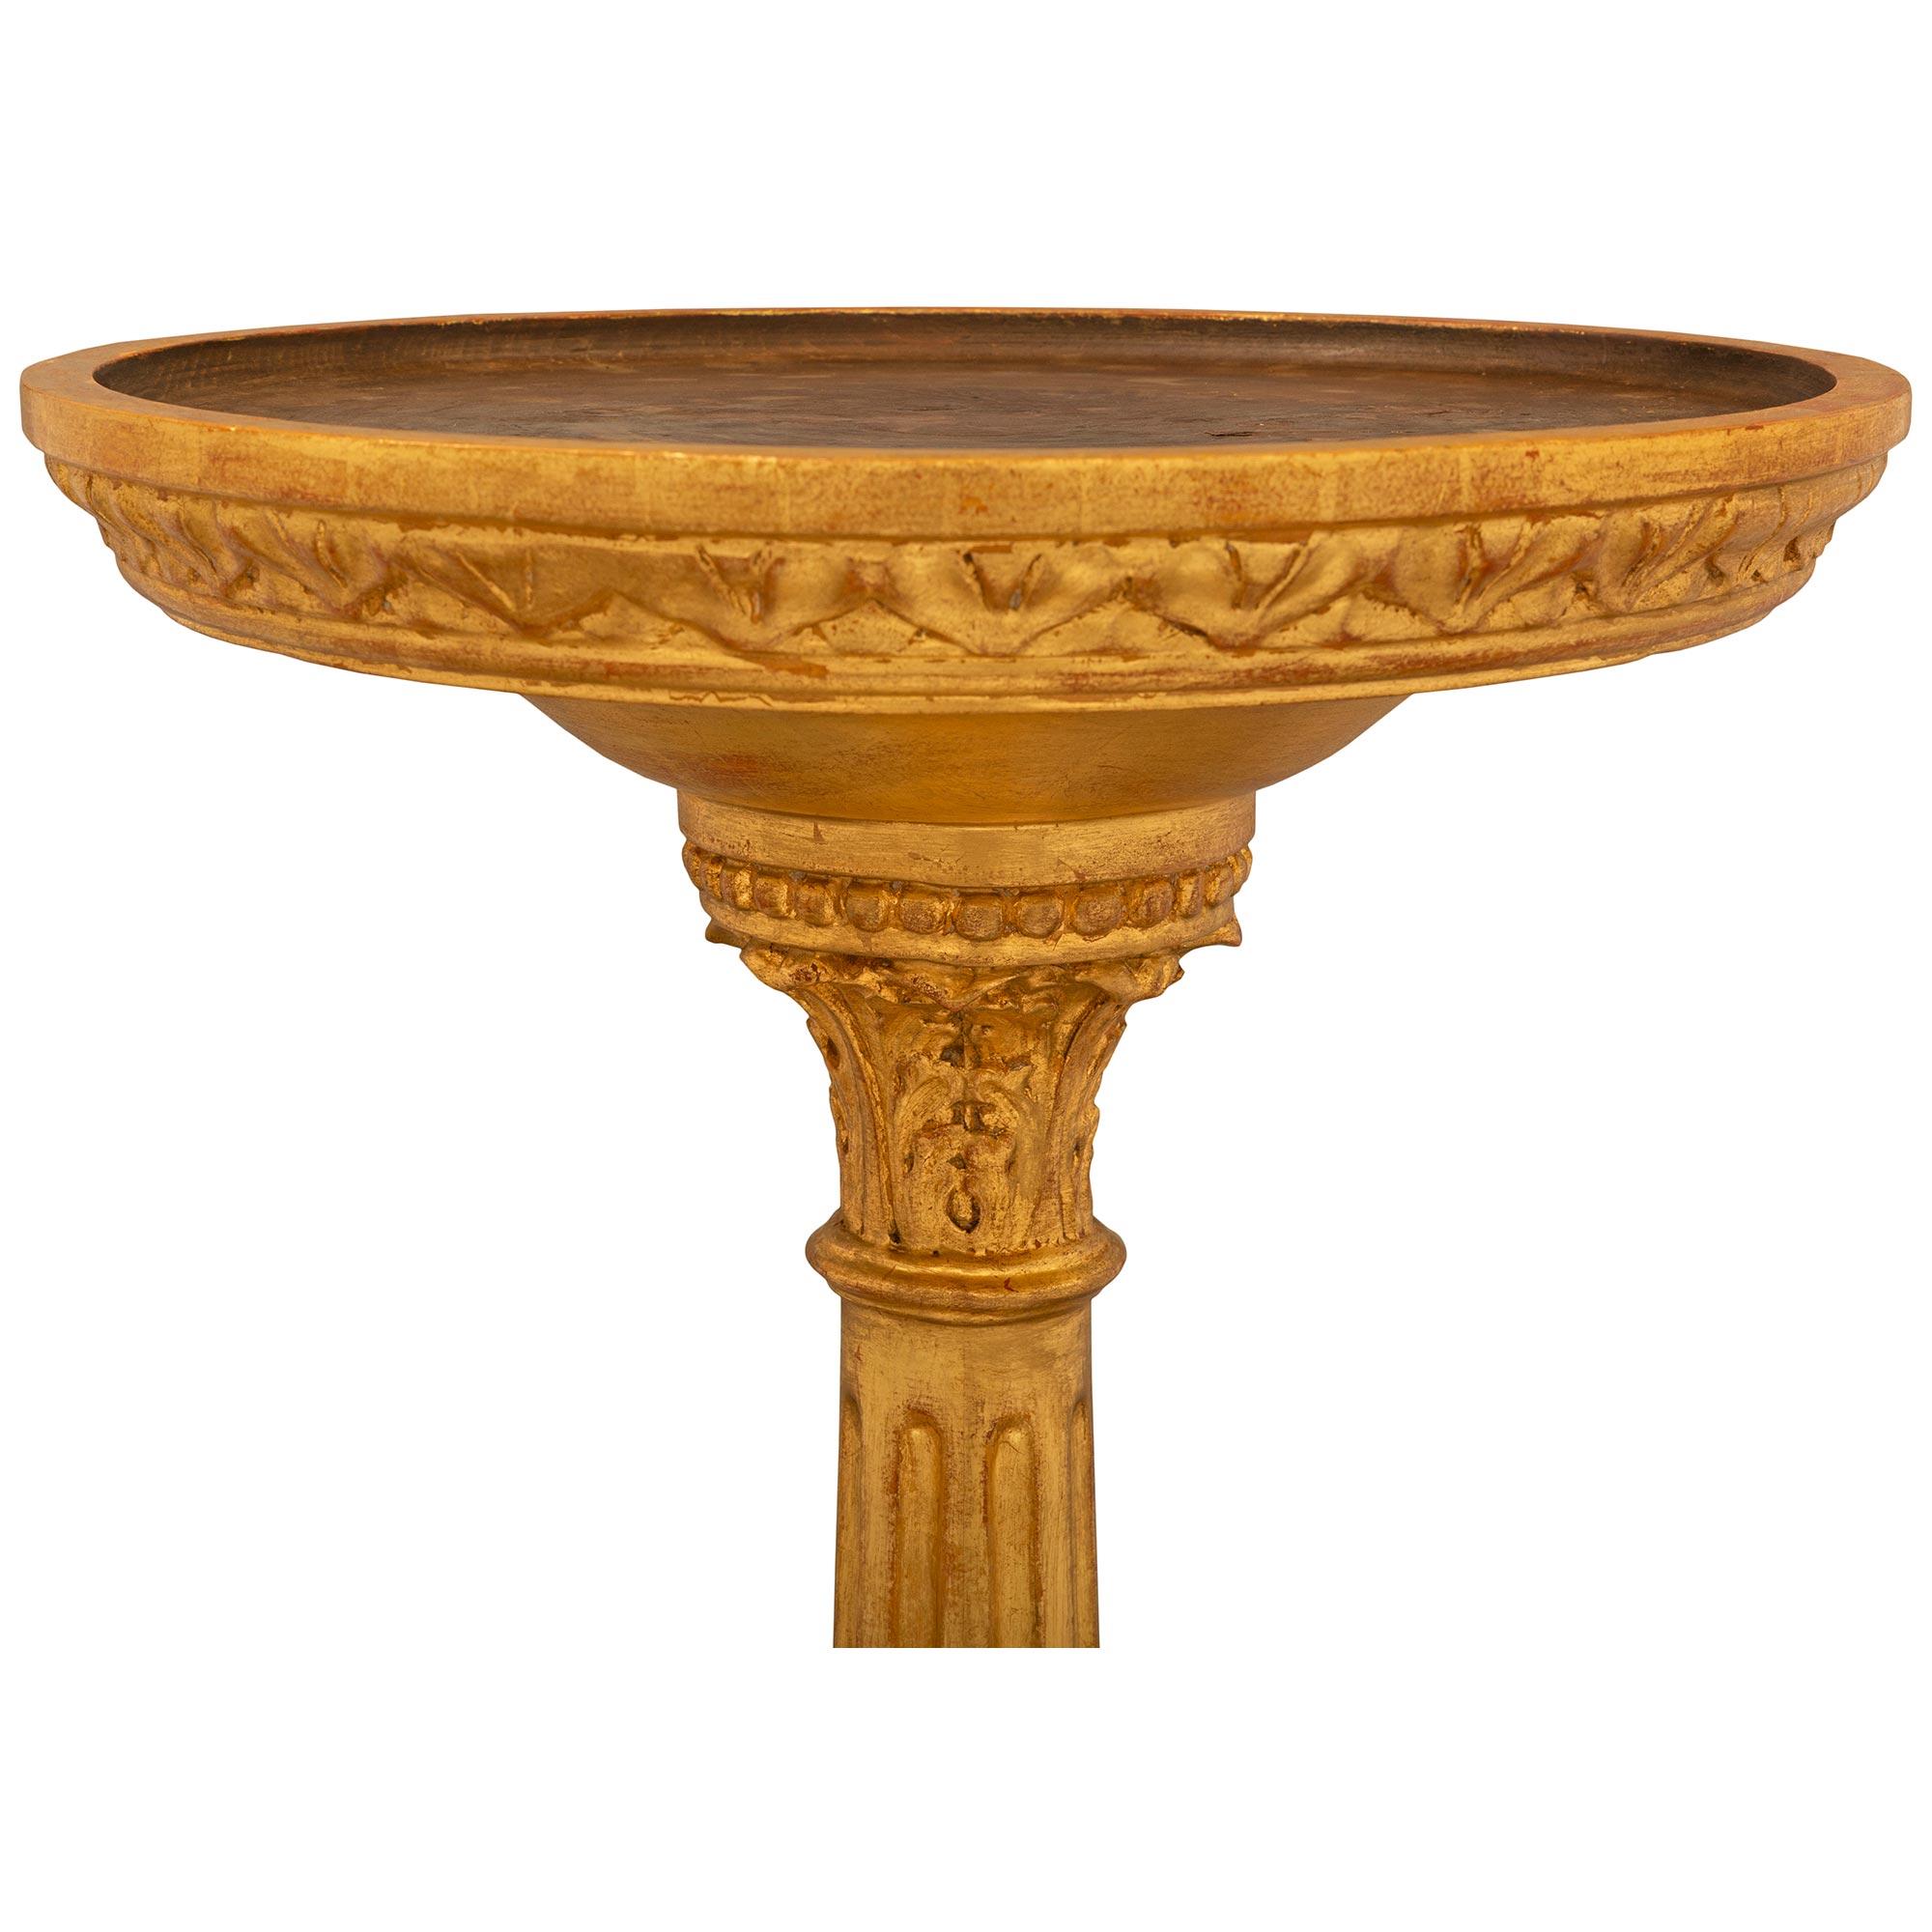 Pair of French 18th Century Louis XVI Period Giltwood & Patinated Wood Pedestals For Sale 1